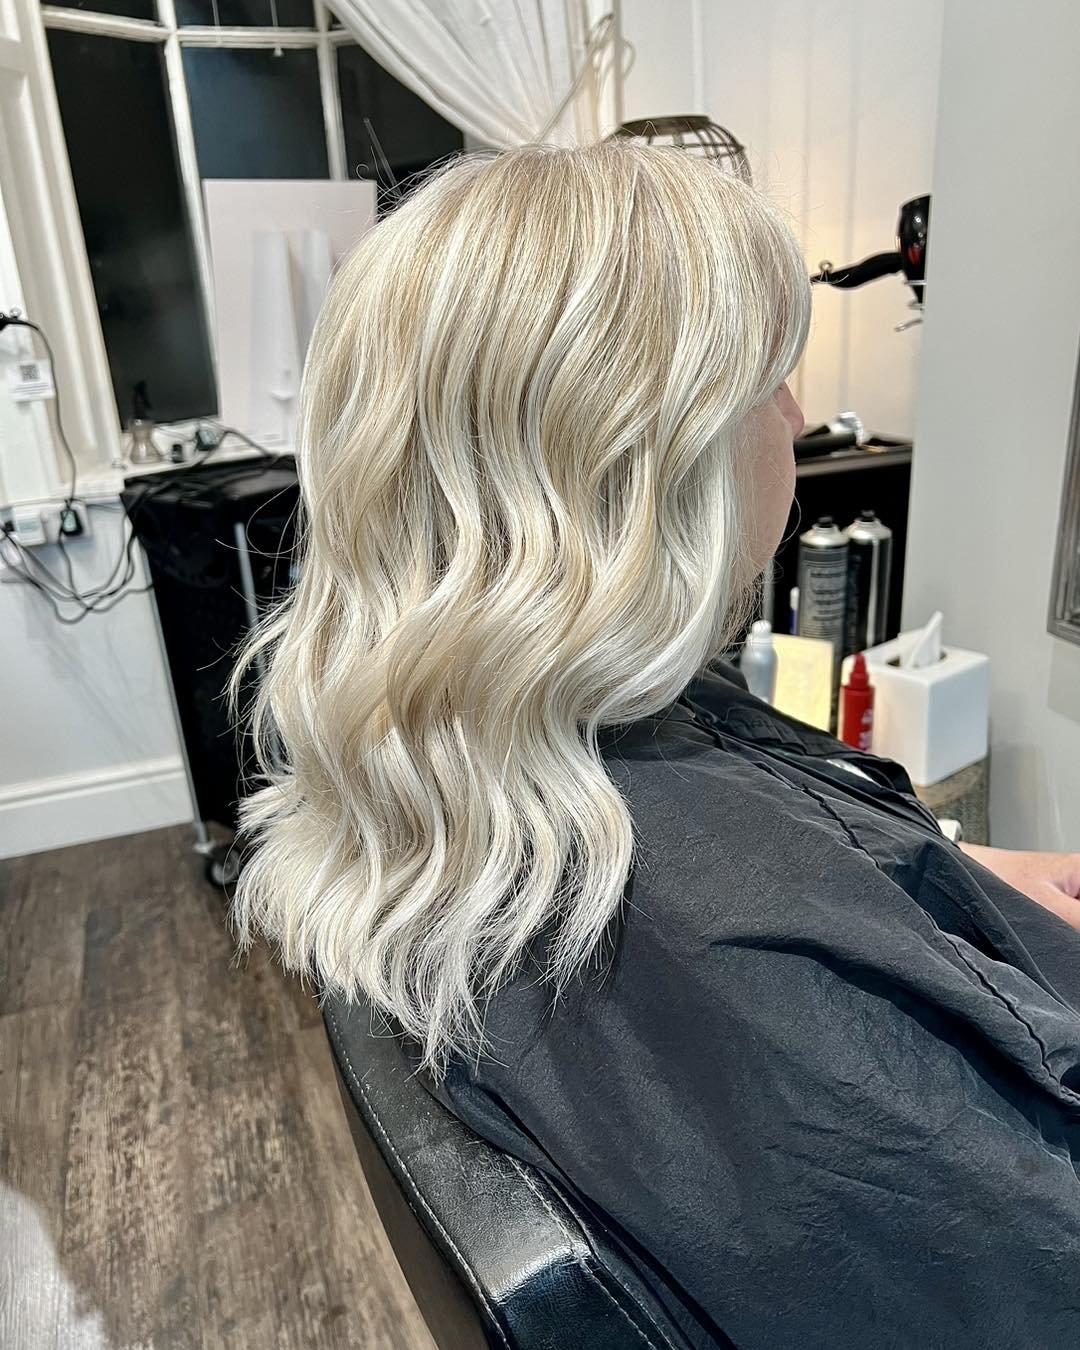 🌟 Embrace Your Natural Beauty! 🌟

Swipe left to see the amazing transformation! This lovely lady was tired of dealing with the regrowth of grey hair, so our talented stylist Tom worked his magic to give her the hair of her dreams.

Tom performed a 